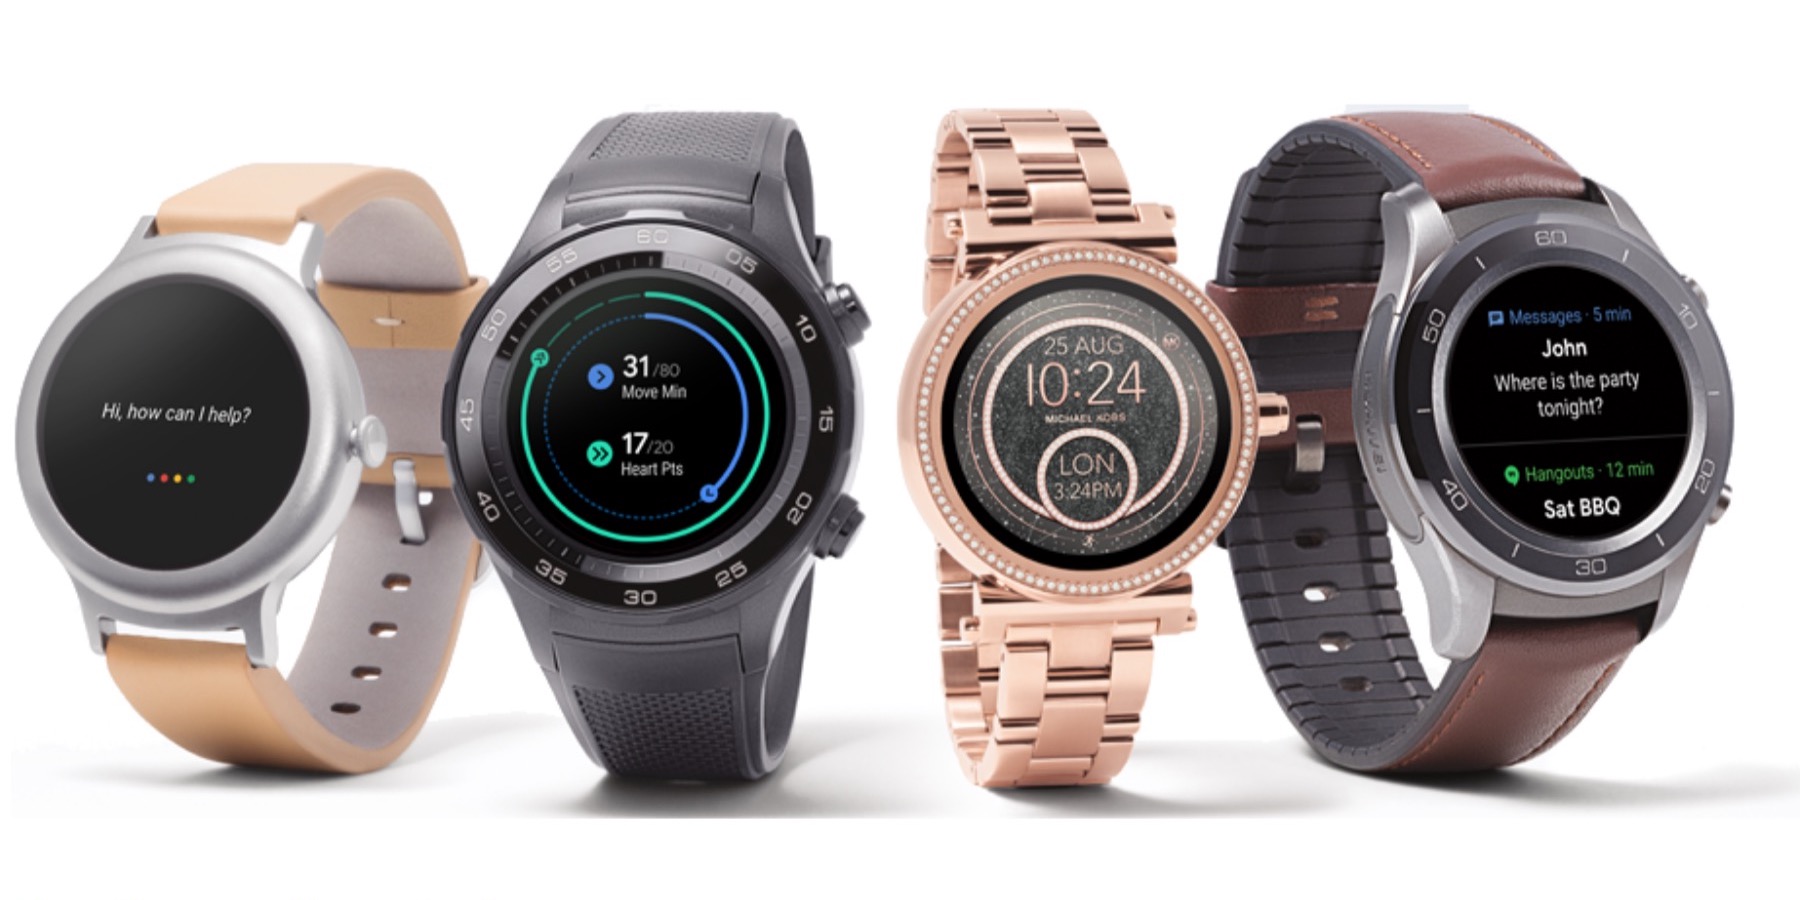 Group, Montblanc, & Louis Vuitton will launch first OS watches w/ Snapdragon Wear 3100